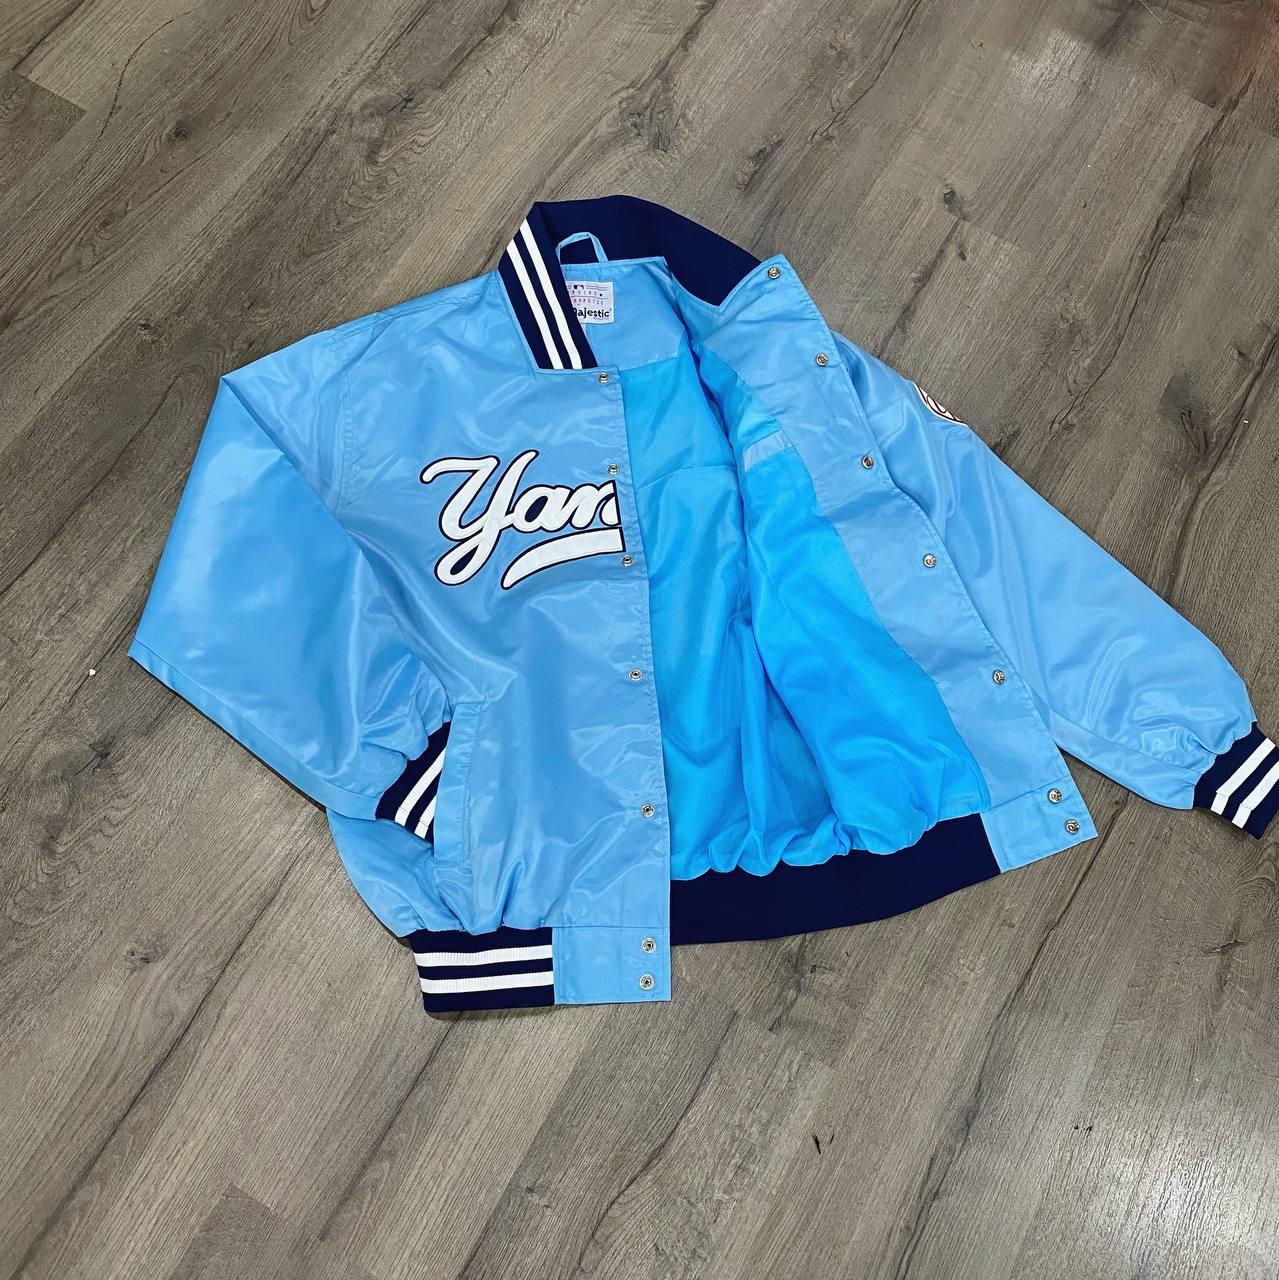 New Limited Line of Retro Starter MLB Satin Jackets Released by Homage   SportsLogosNet News